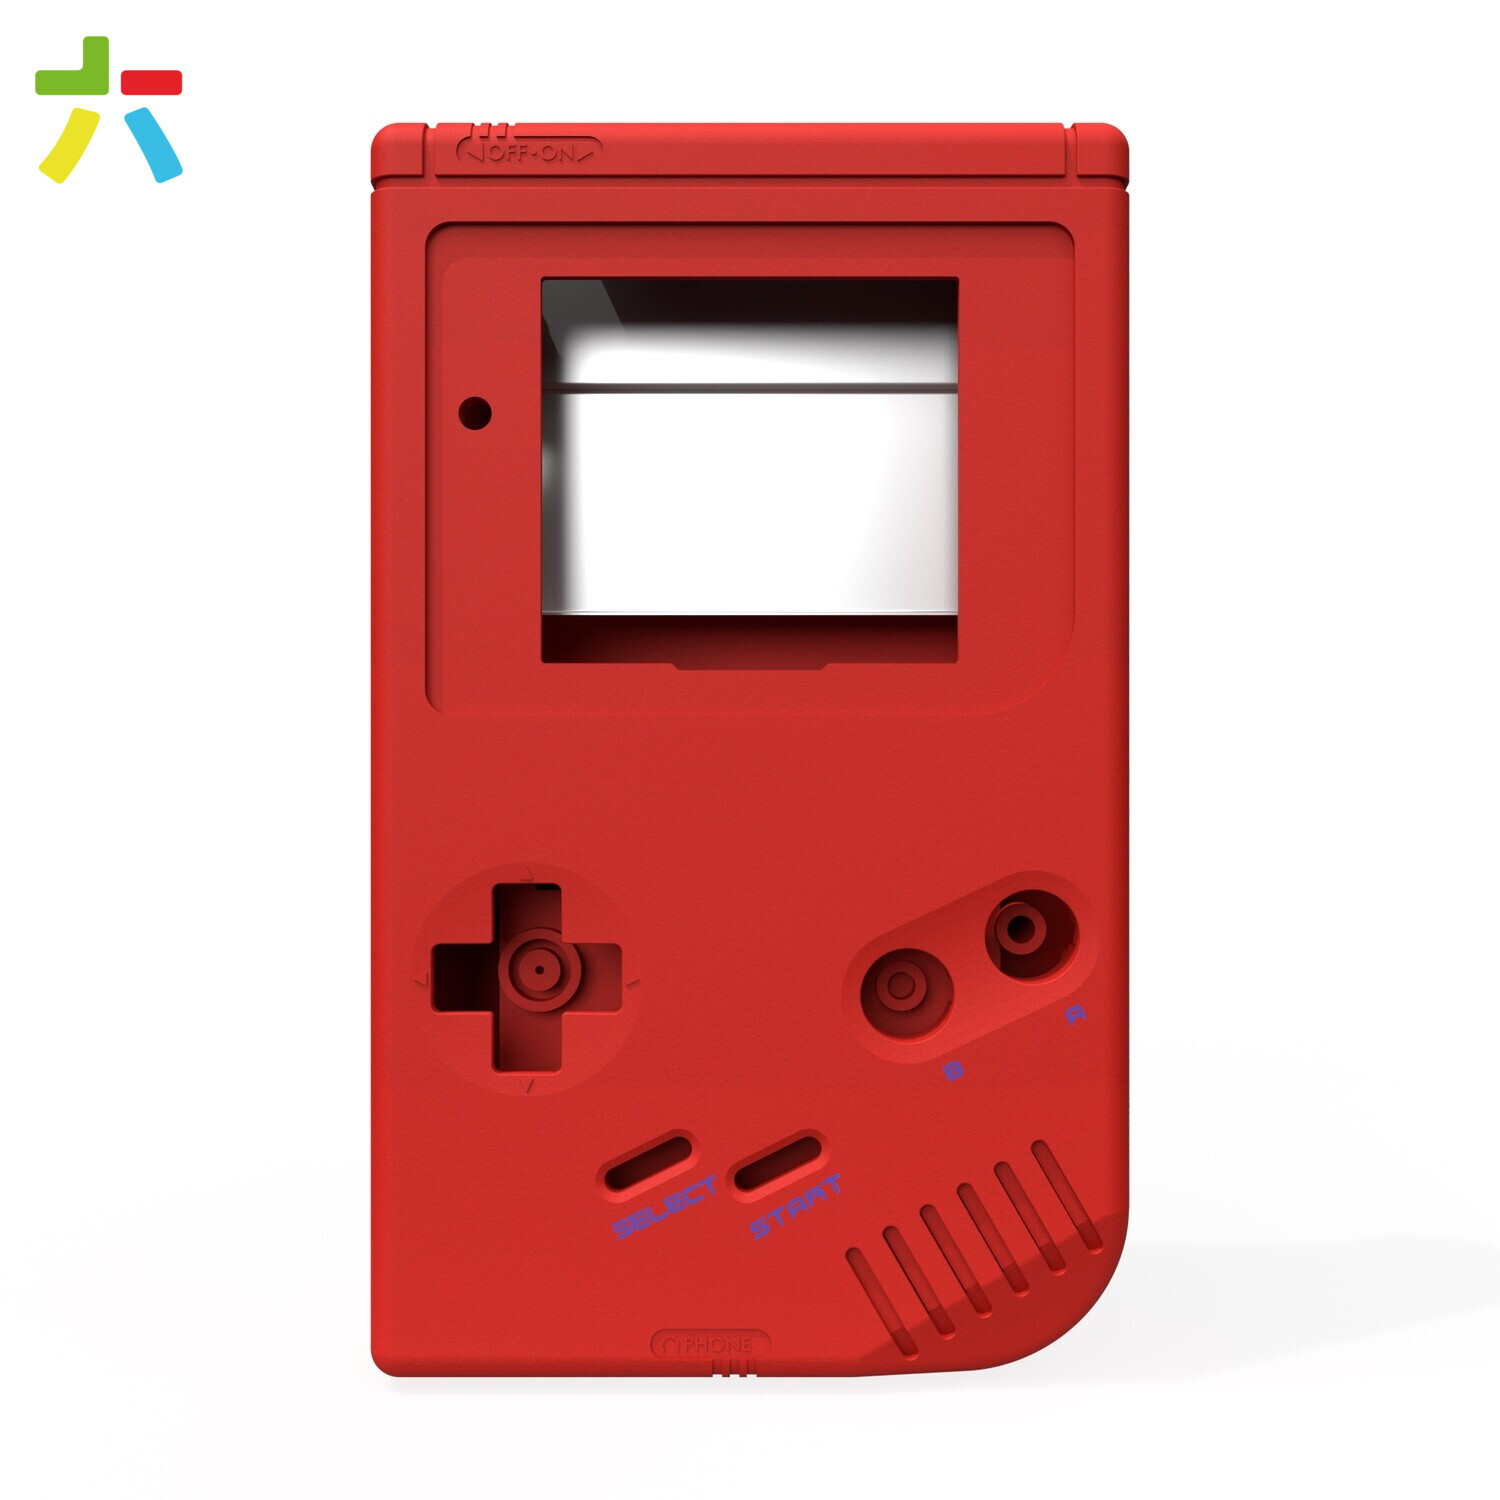 Game Boy Original Shell Kit (Pearl Red - Soft Touch)